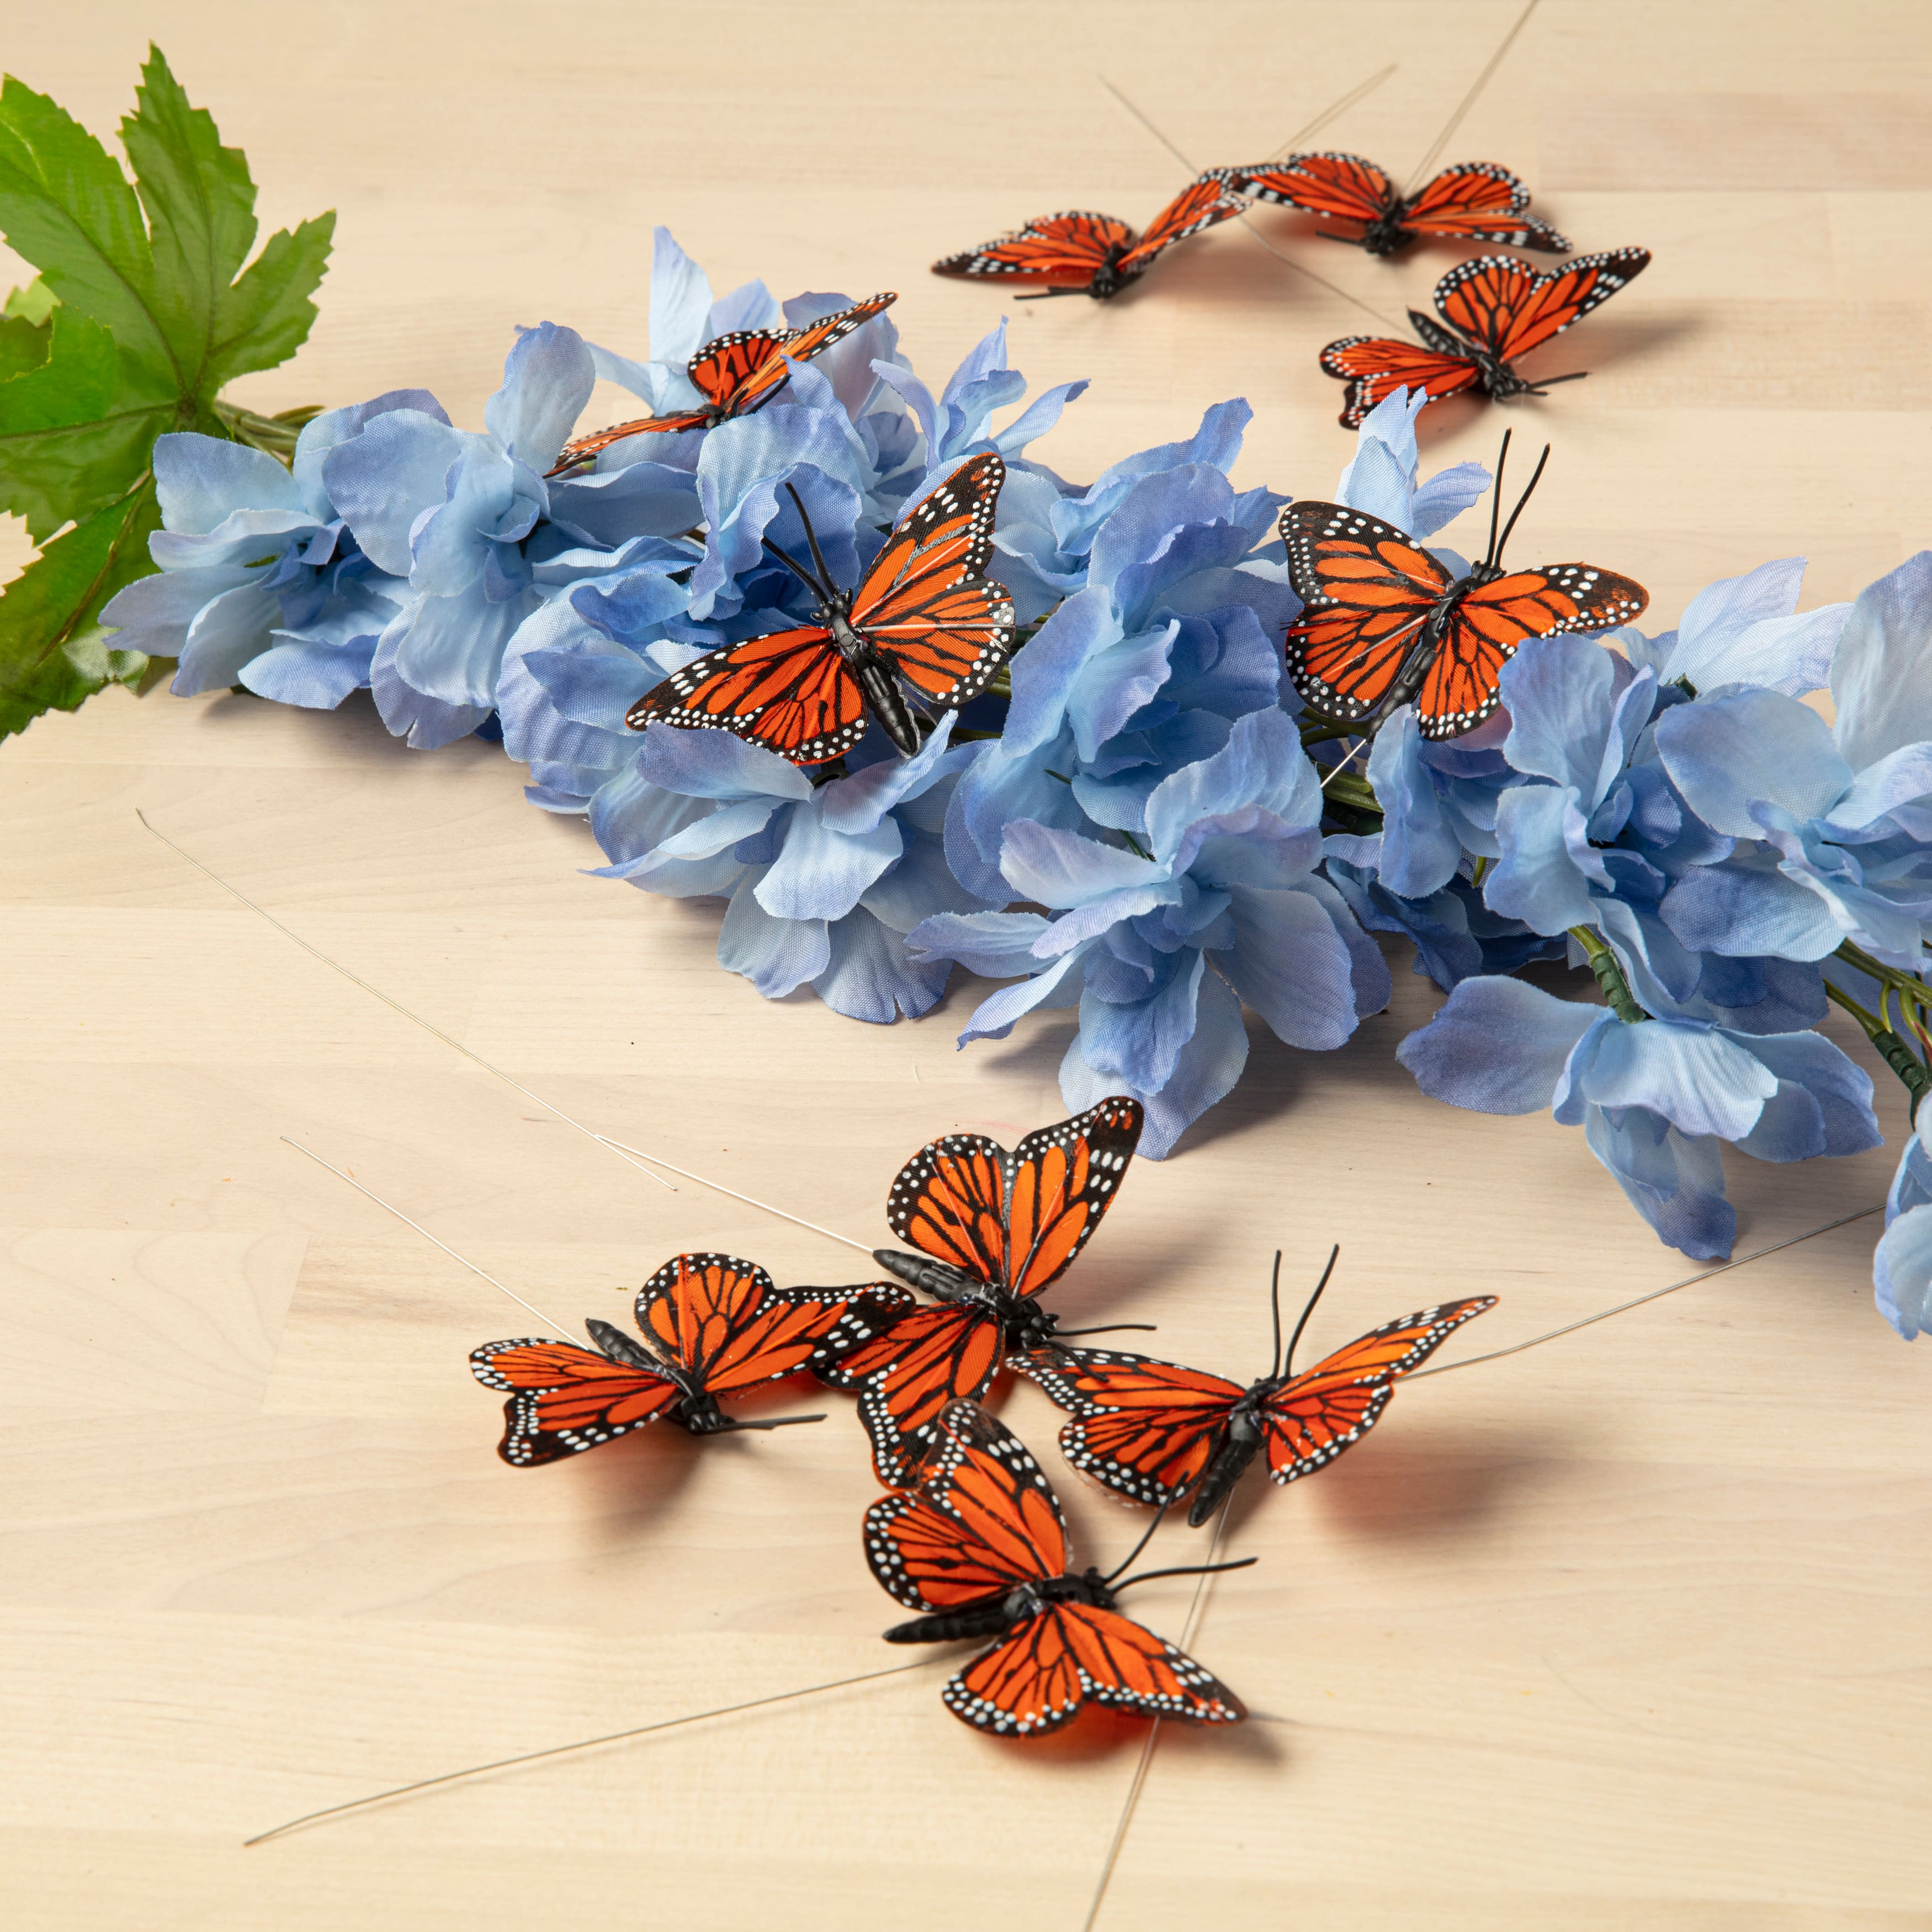 12 Packs: 10 ct. (120 total) Assorted 7.8&#x22; Monarch Butterflies by Ashland&#xAE;